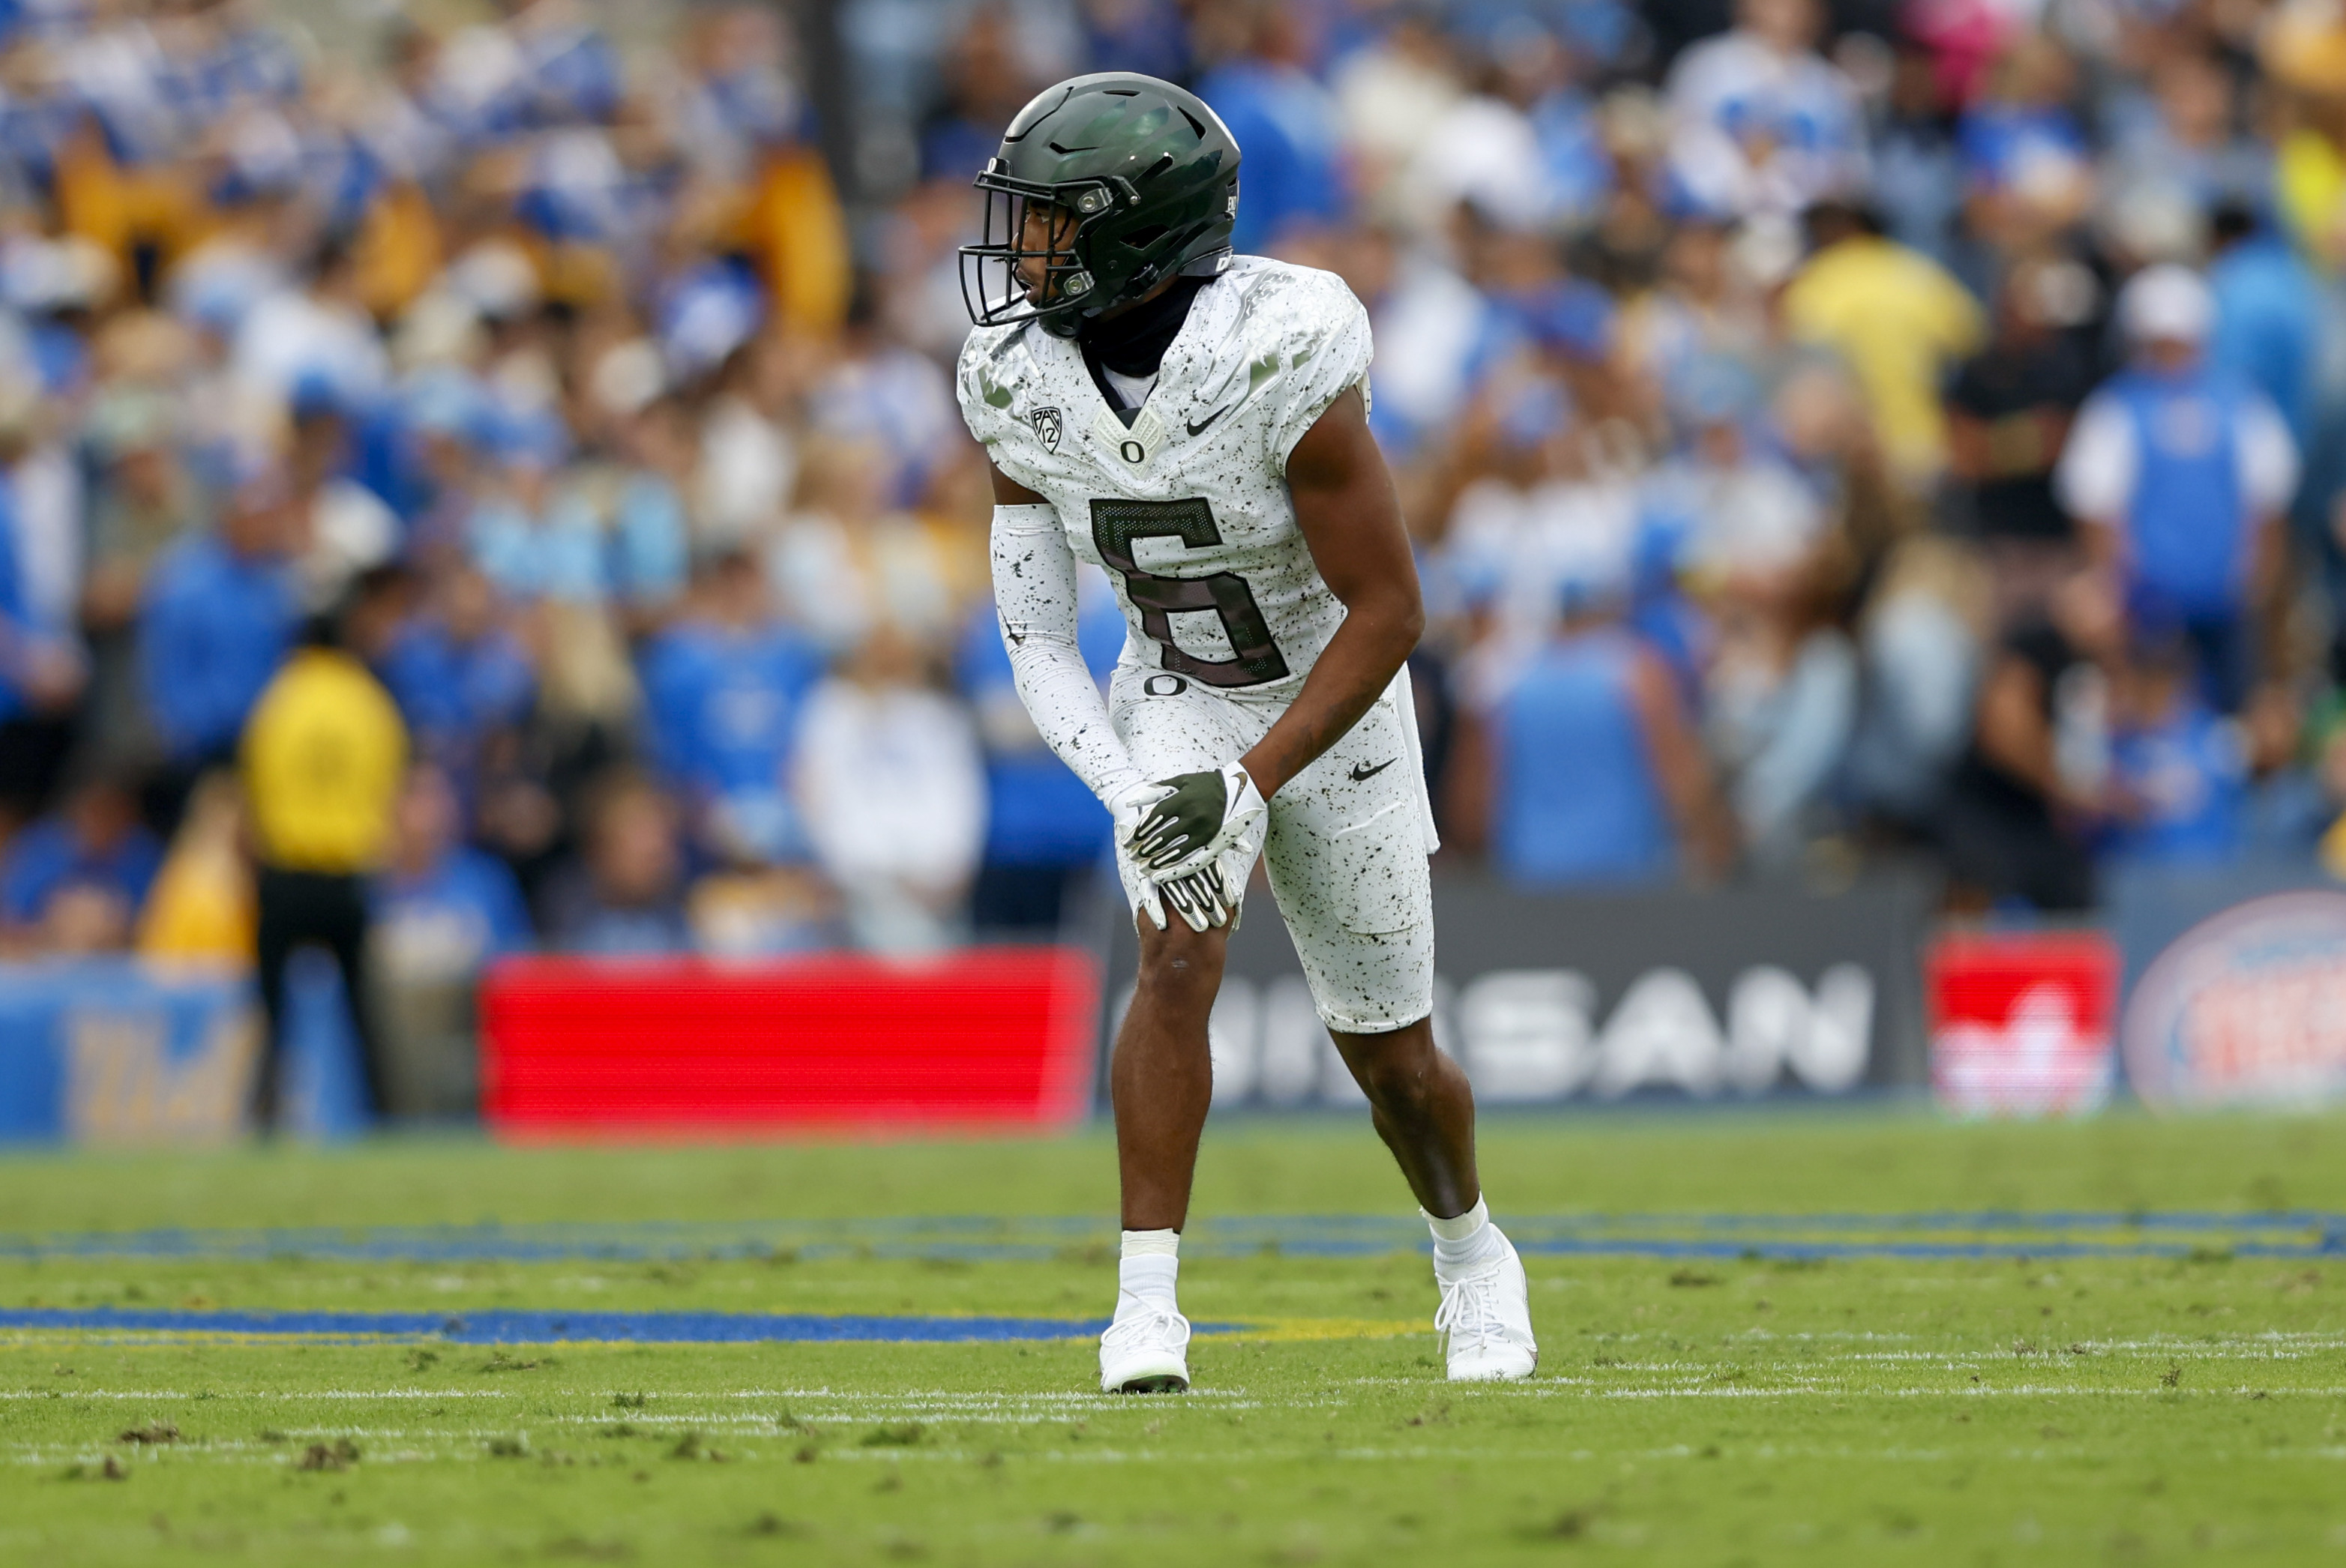 Former Oregon WR Jaylon Redd Had Surgery in January After Pancreatic Cancer Diagnosis